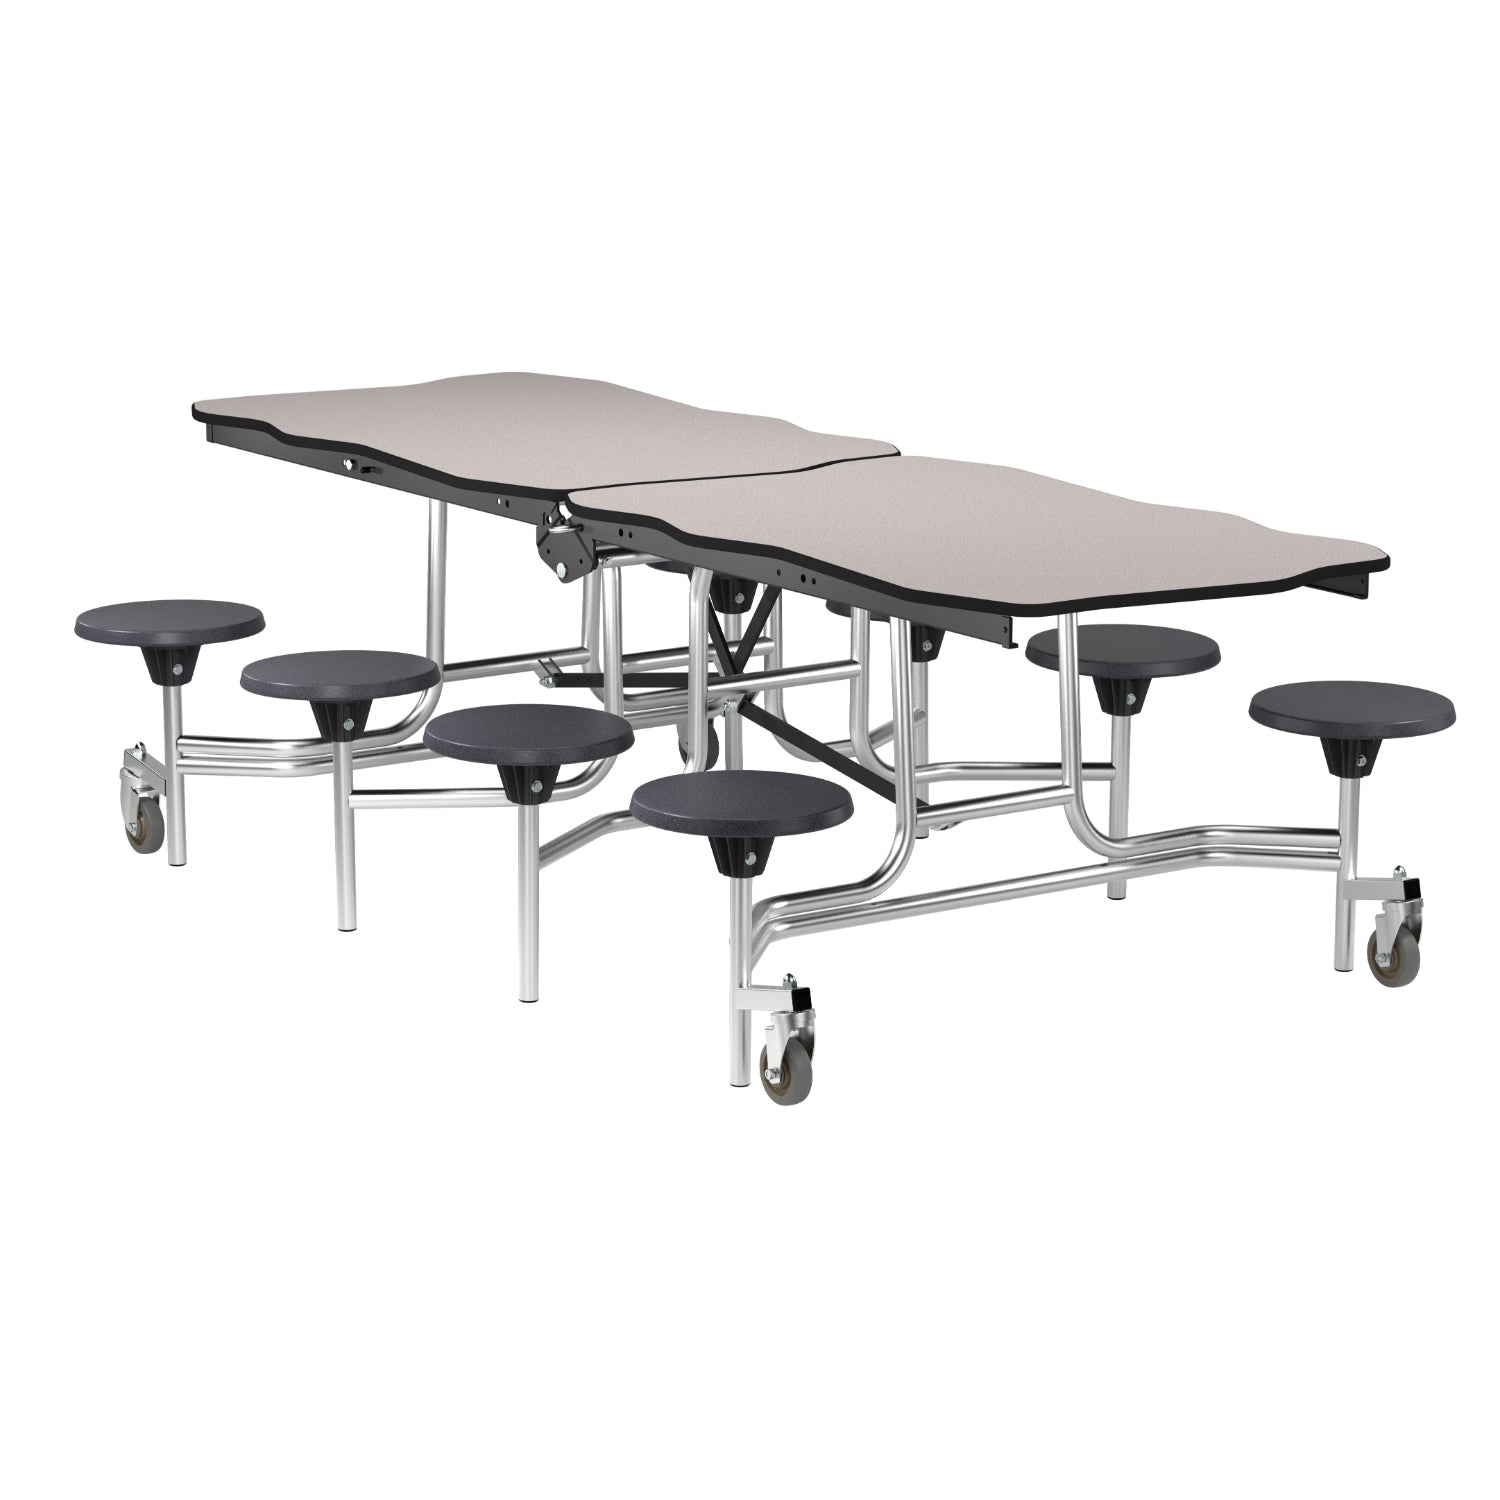 Mobile Cafeteria Table with 8 Stools, 8' Bedrock, MDF Core, Black ProtectEdge, Chrome Frame